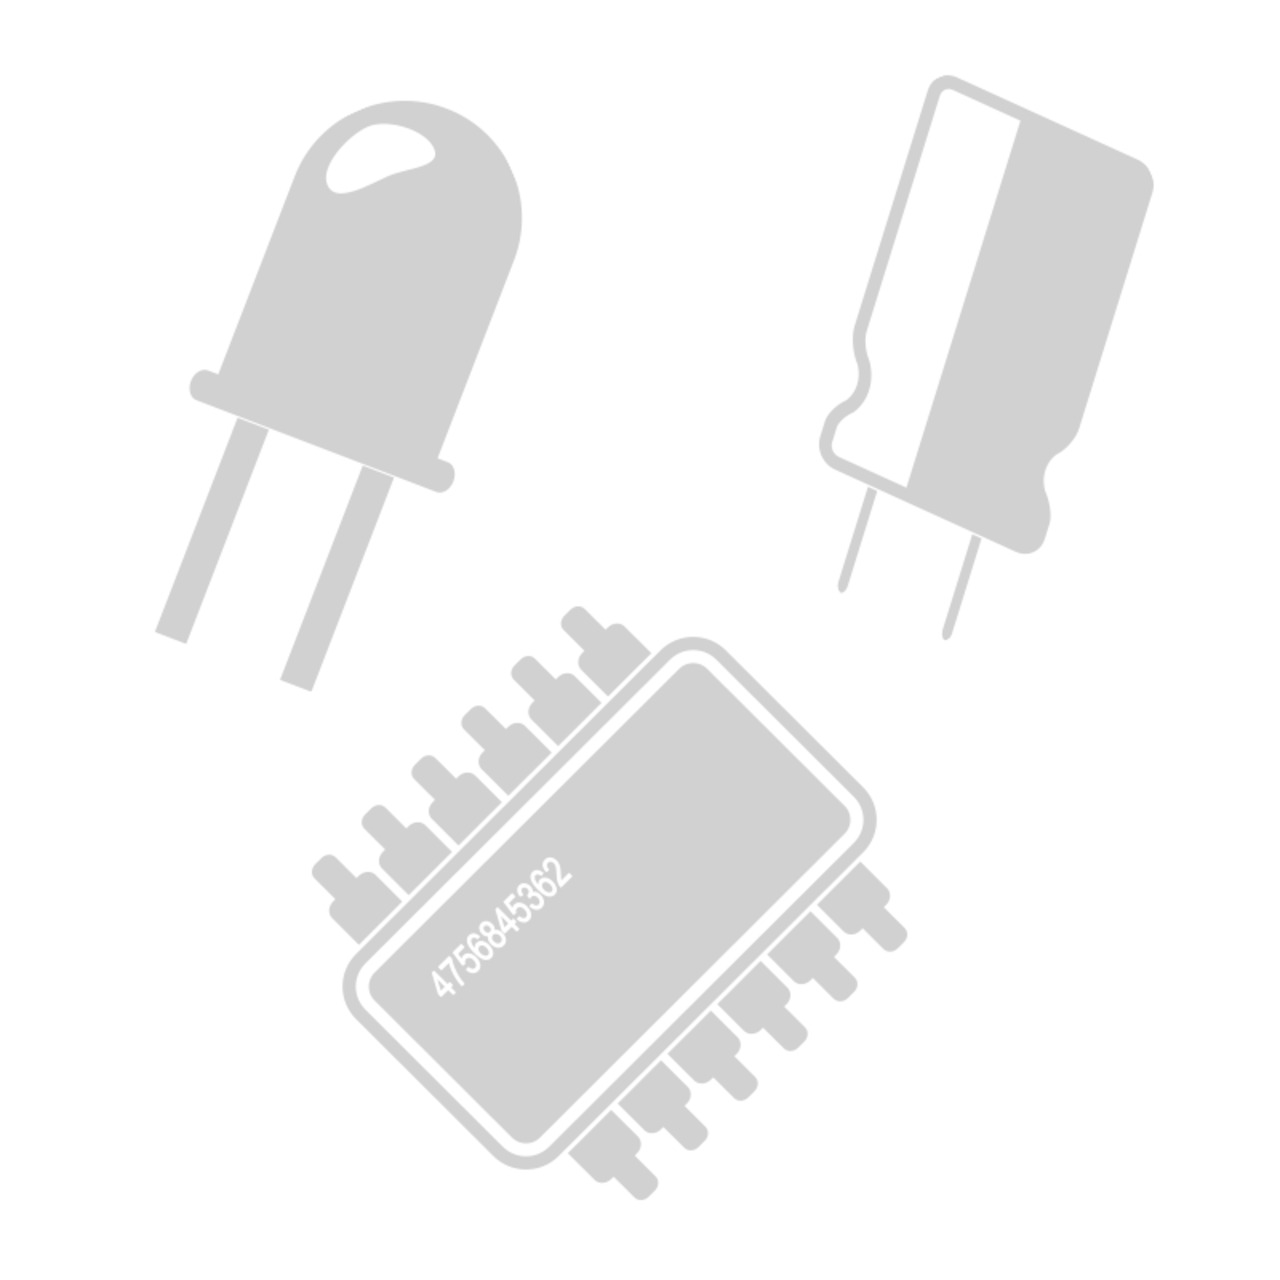 Diotec Semiconductor Diode BY 500-800 V unter Komponenten